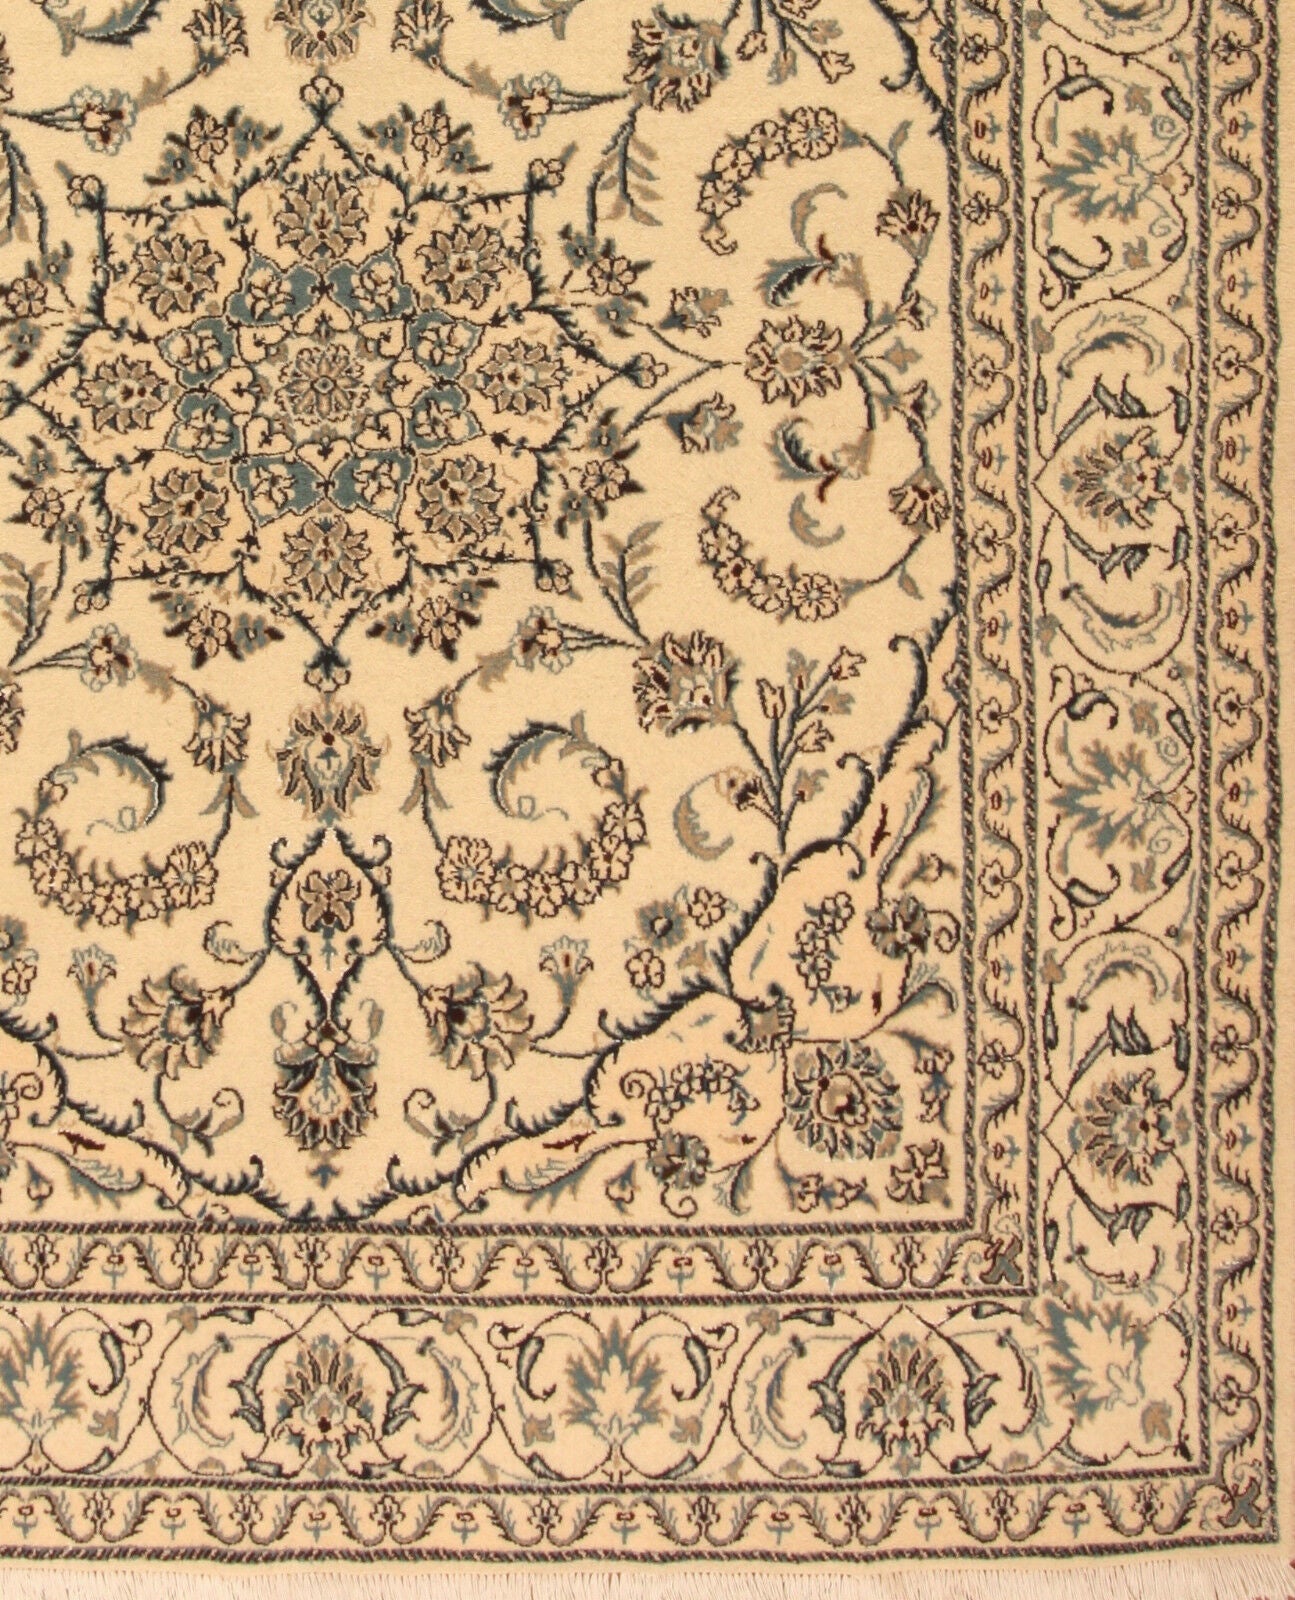 Front view of the Handmade Contemporary Persian Nain Rug highlighting design elements